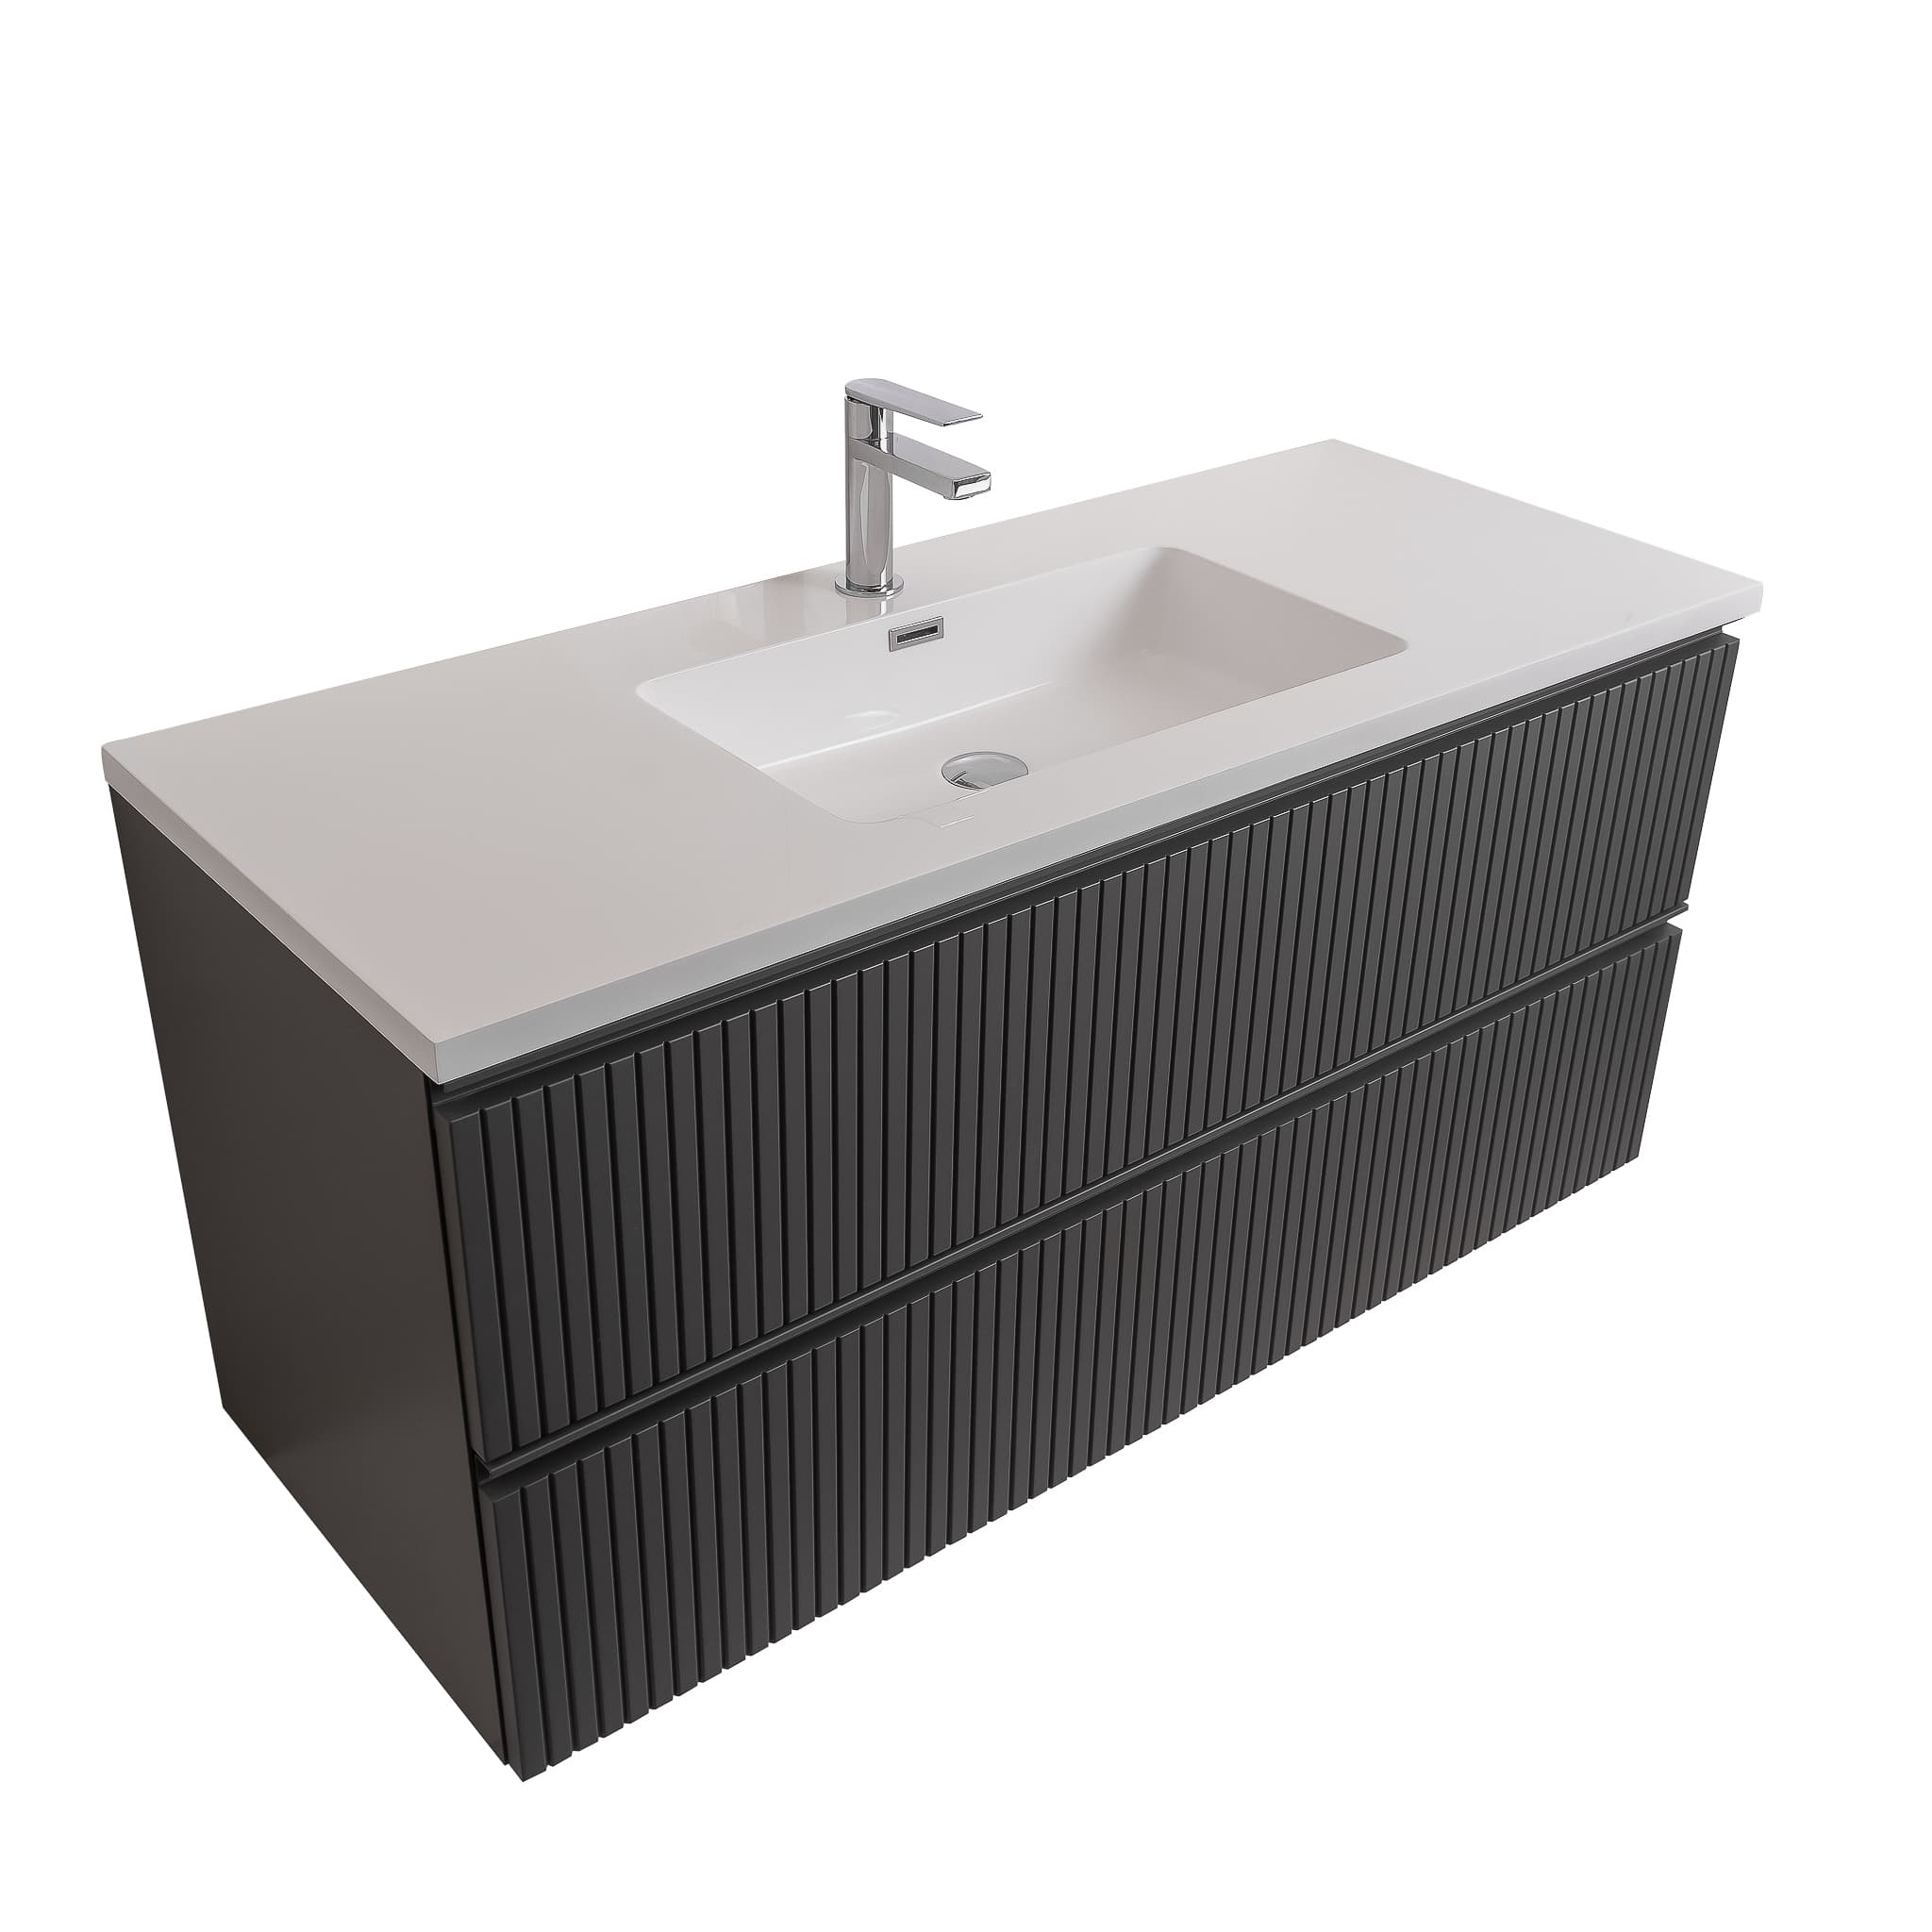 Ares 47.5 Matte Grey Cabinet, Square Cultured Marble Sink, Wall Mounted Modern Vanity Set